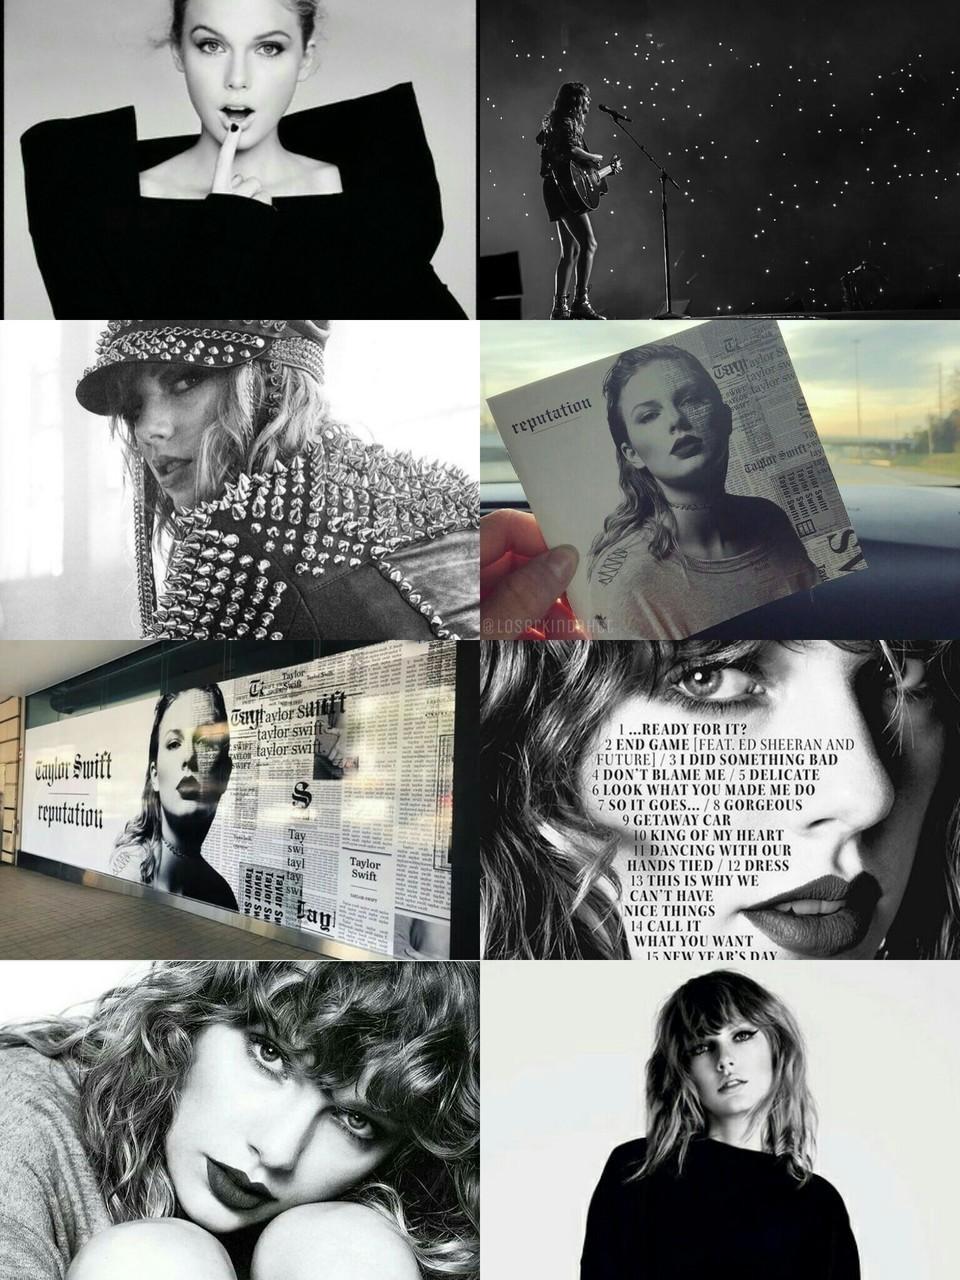 image about TAYLOR SWİFT WALLPAPER. See